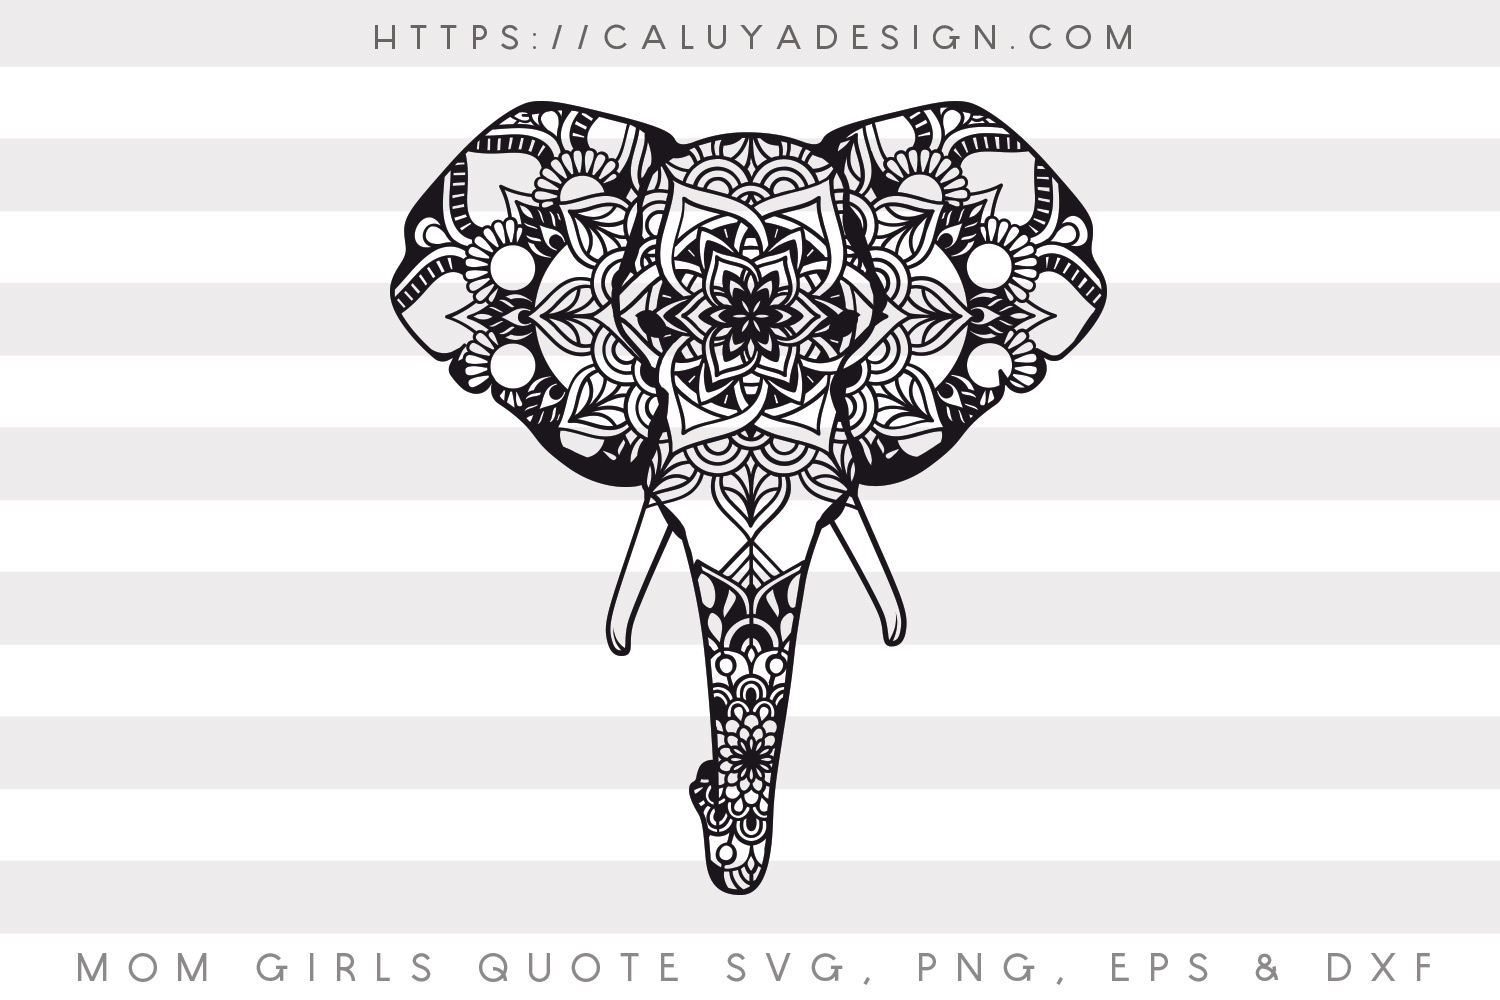 Download Free Png Archives Page 3 Of 6 Caluya Design